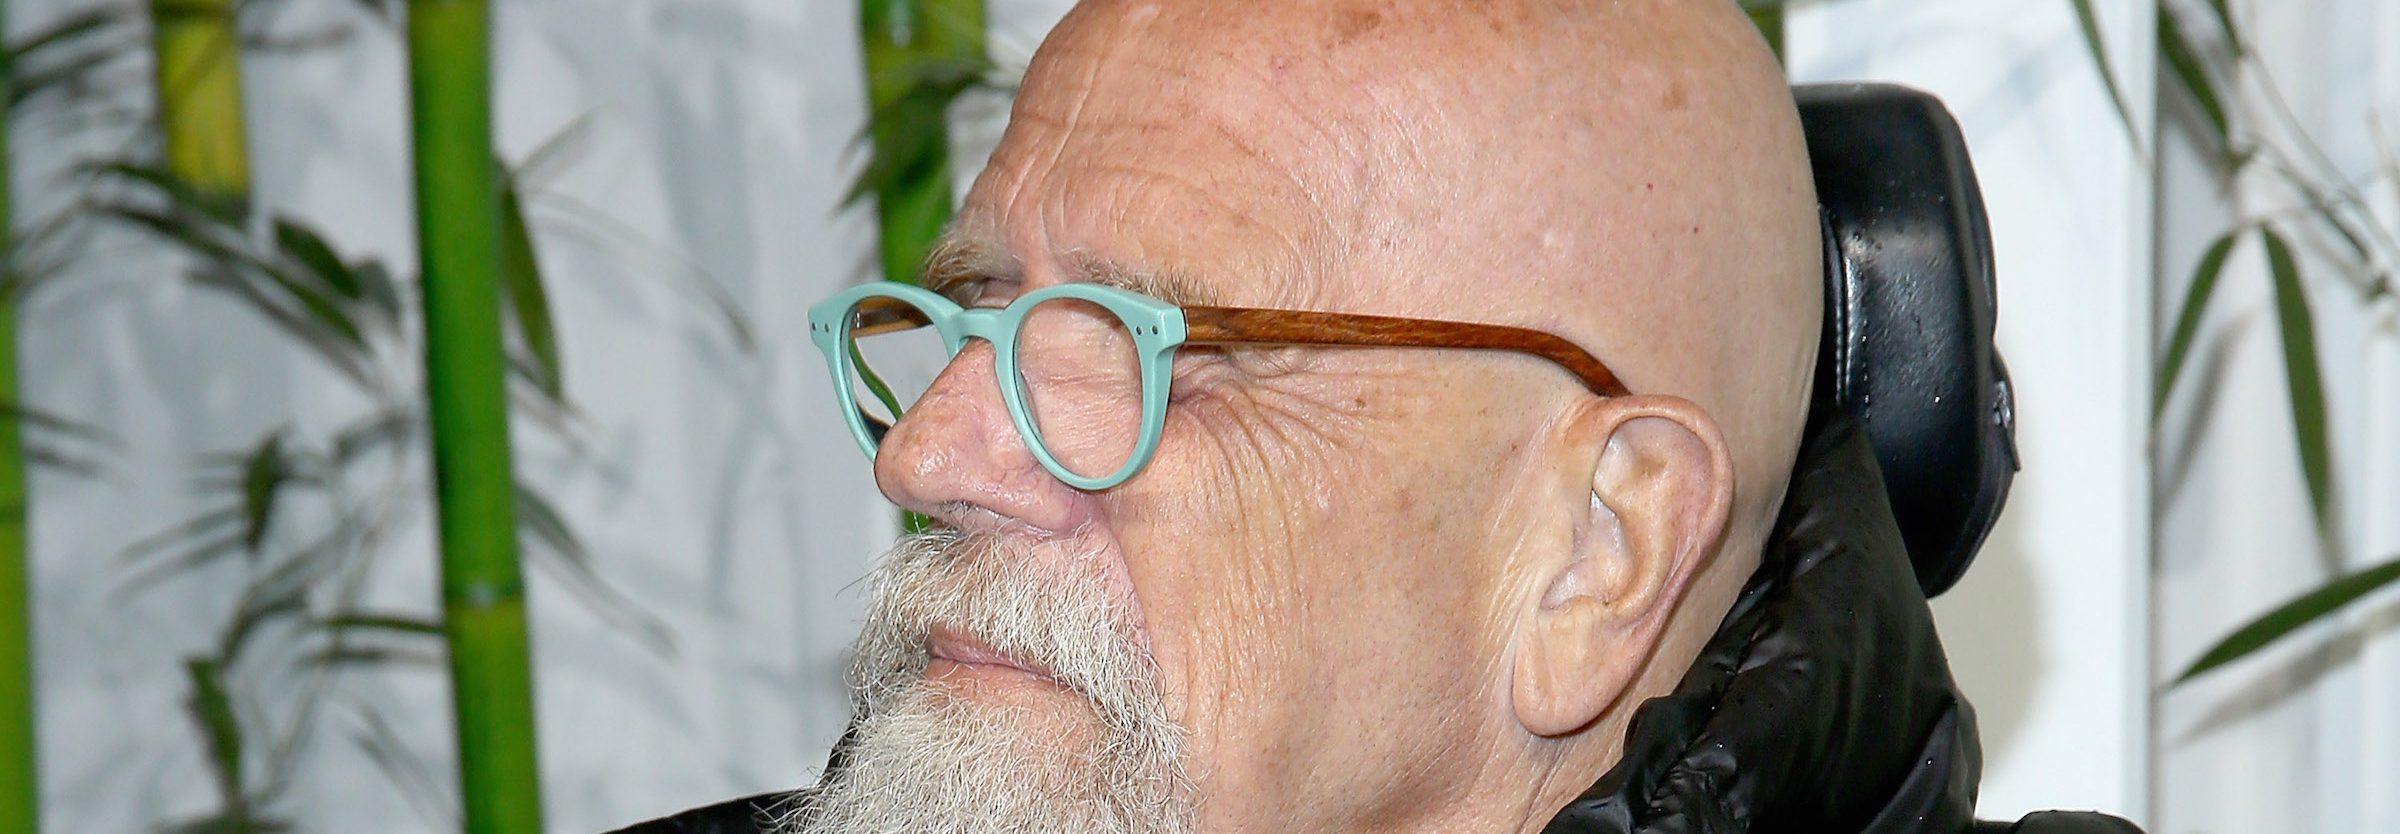 Chuck Close attends the 2015 Museum of Modern Art Party In The Garden and special salute to David Rockefeller on his 100th Birthday at Museum of Modern Art on June 2, 2015 in New York City.  (Photo by Paul Zimmerman/WireImage)